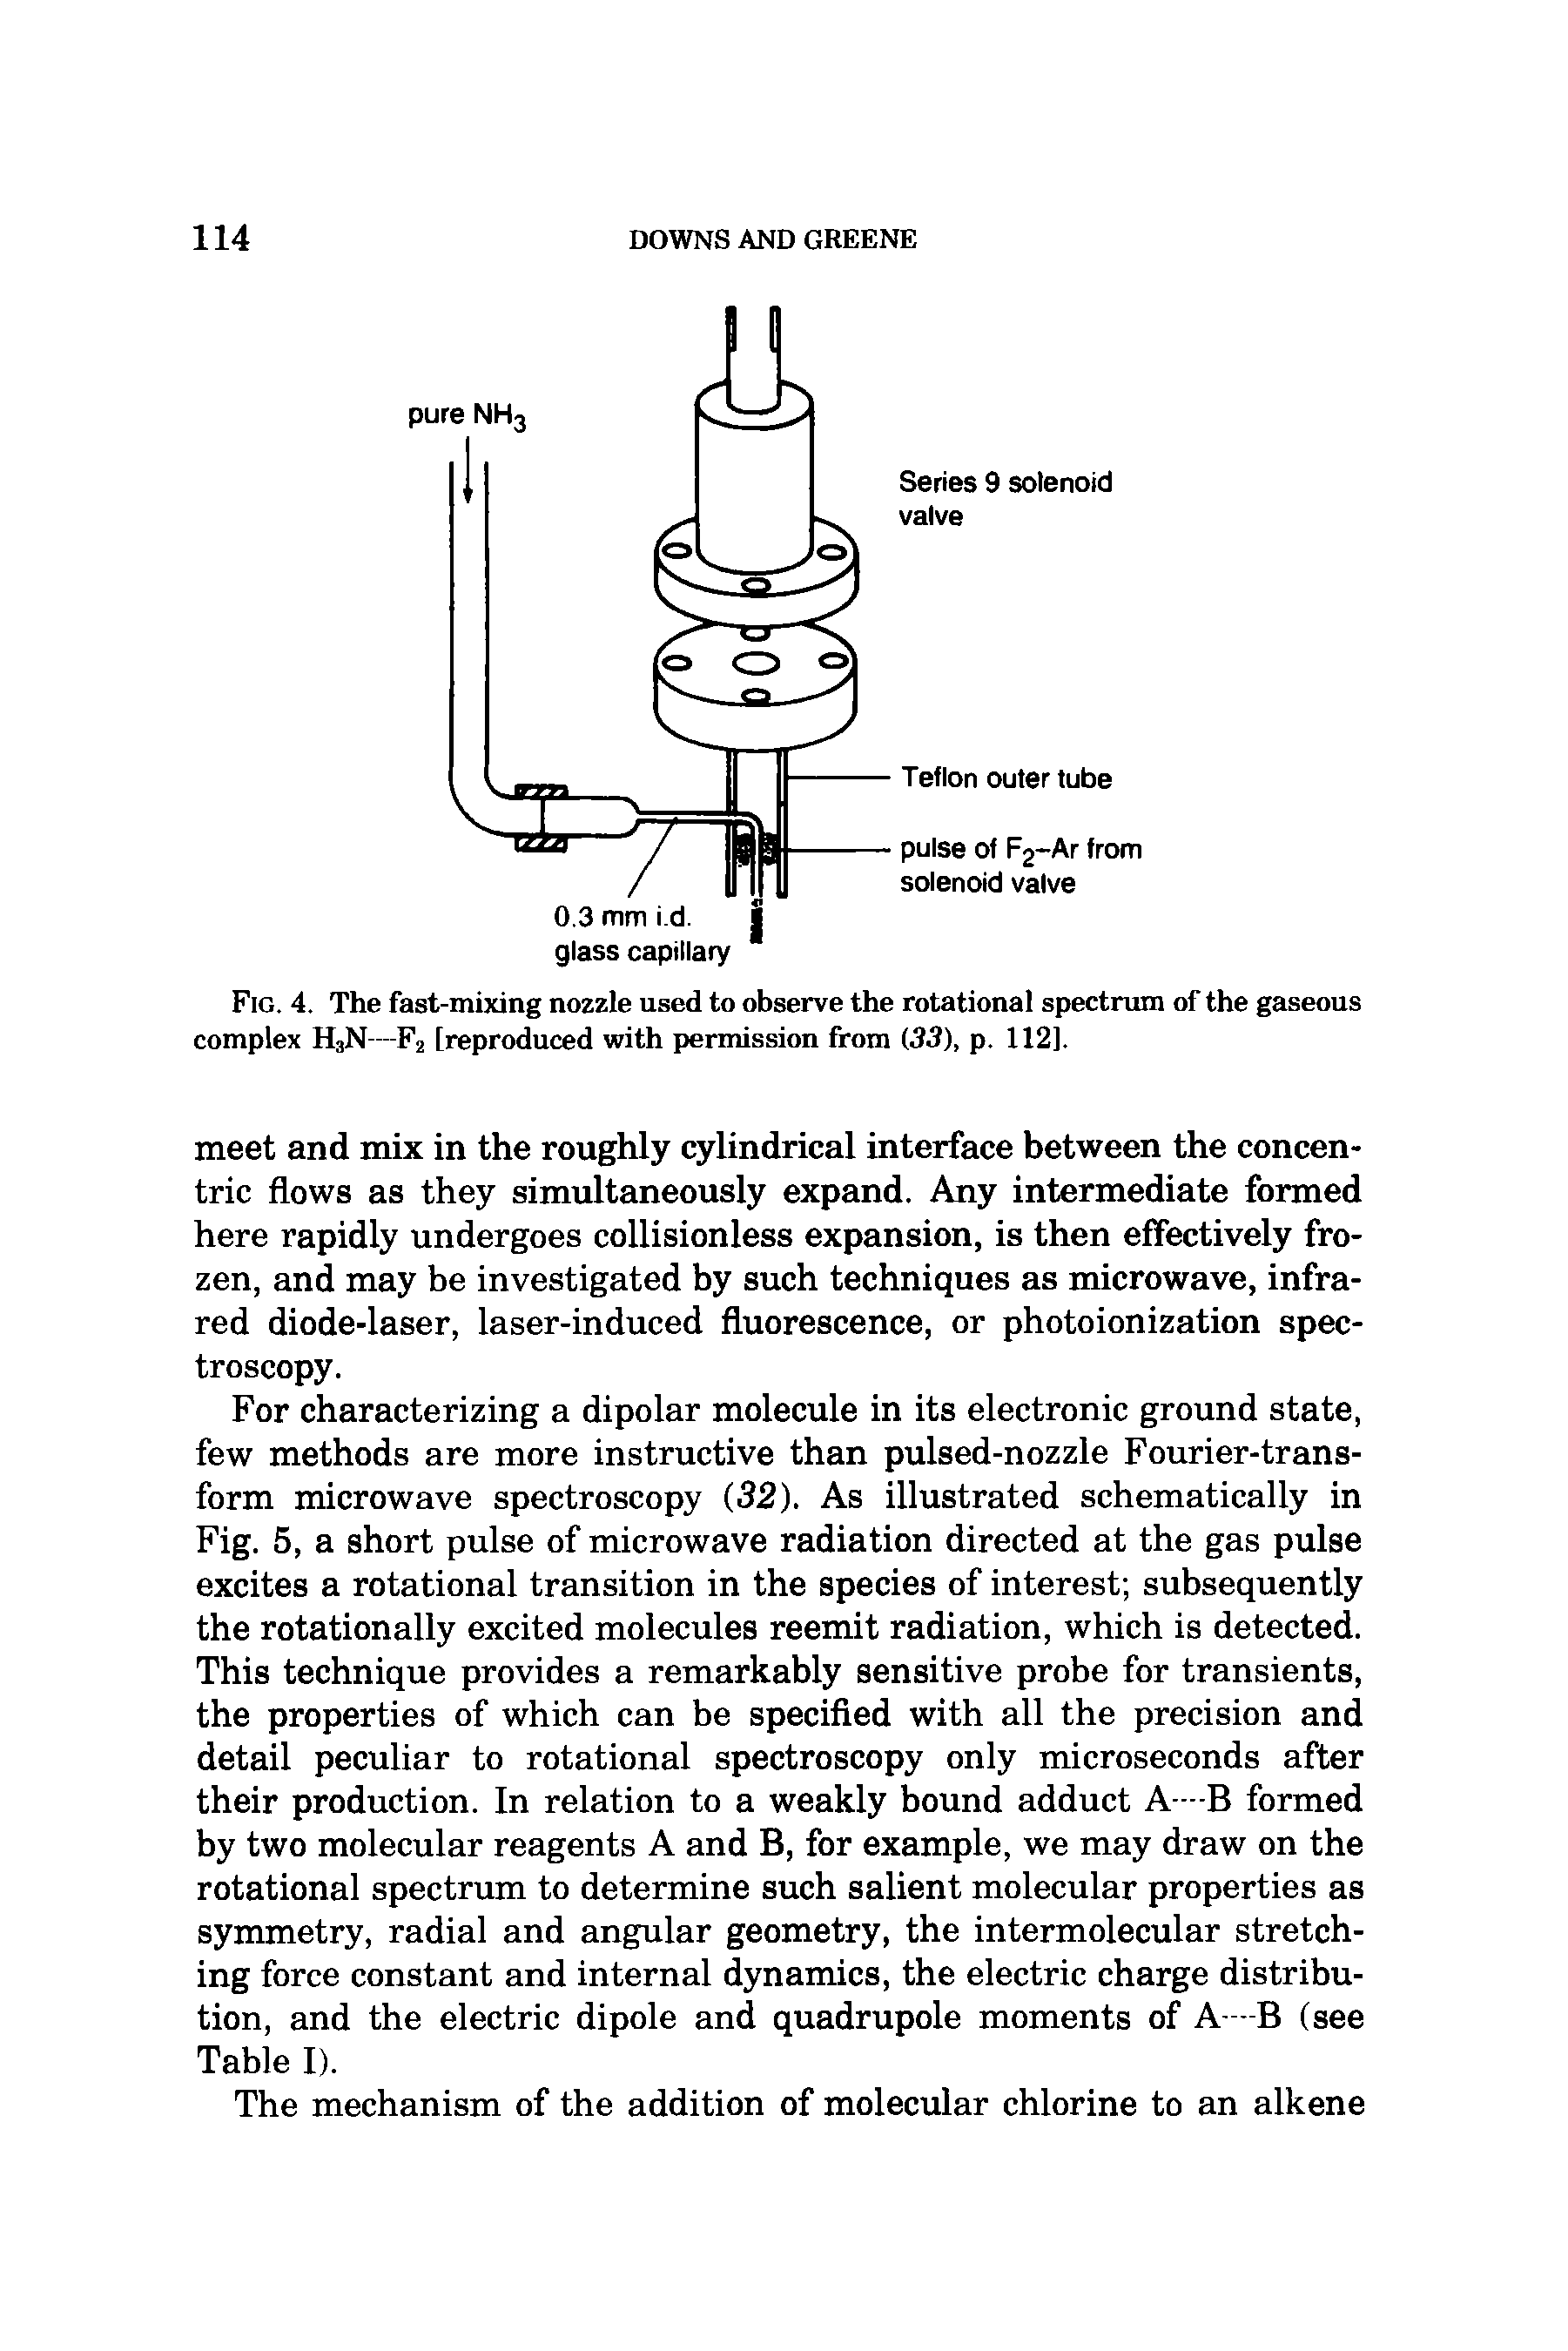 Fig. 4. The fast-mixing nozzle used to observe the rotational spectrum of the gaseous complex H3N—F2 [reproduced with permission from (33), p. 112].